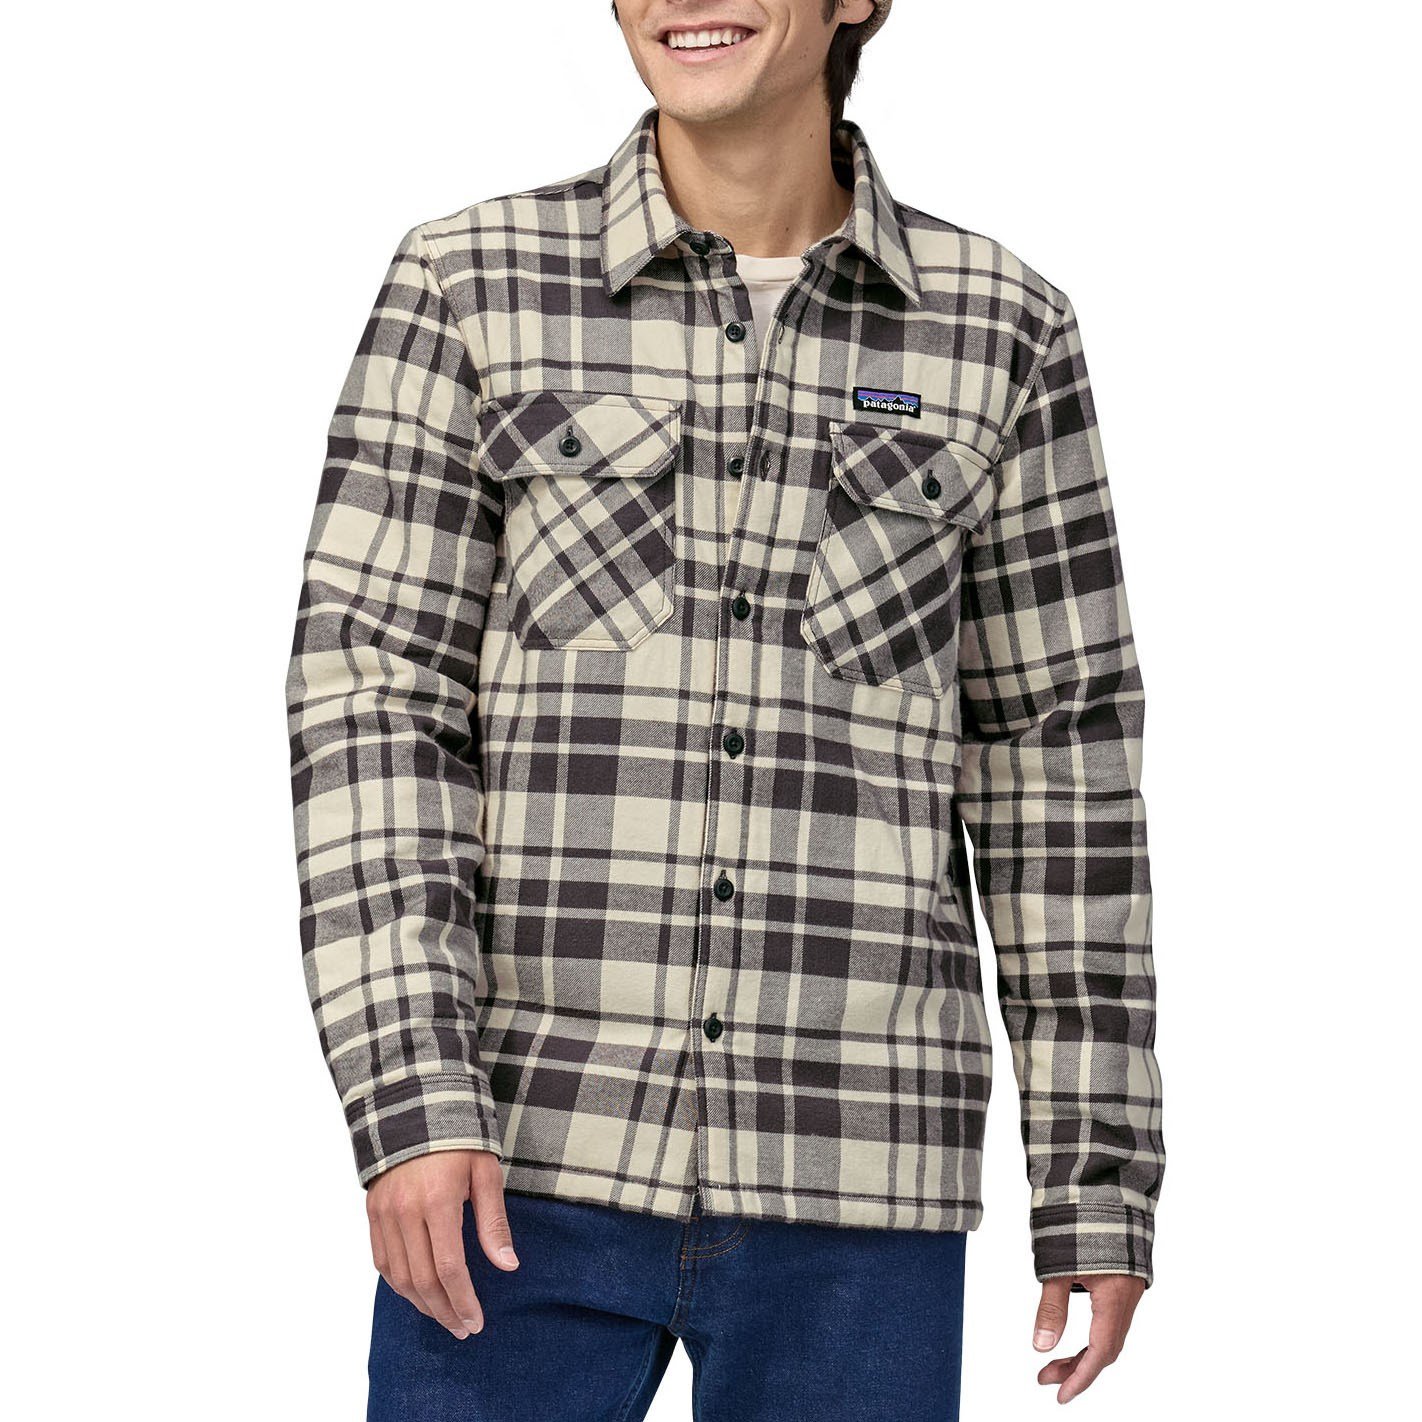 https://images.evo.com/imgp/zoom/212098/1041707/patagonia-fjord-midweight-insulated-flannel-shirt-men-s-.jpg